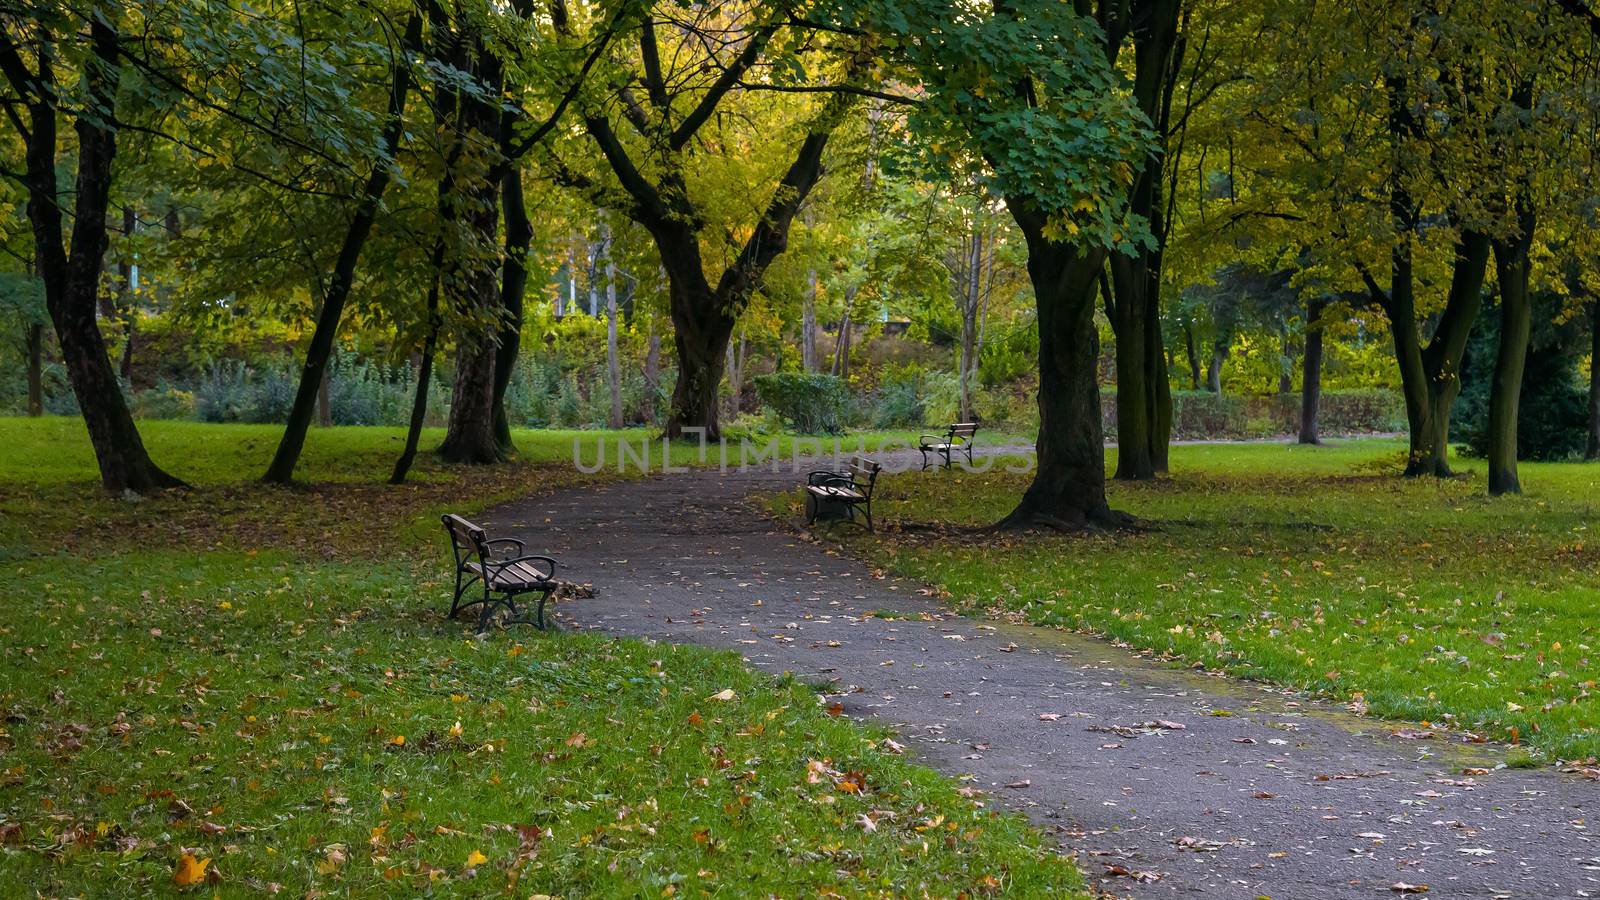 Benches at the alley in the park at autumn evening